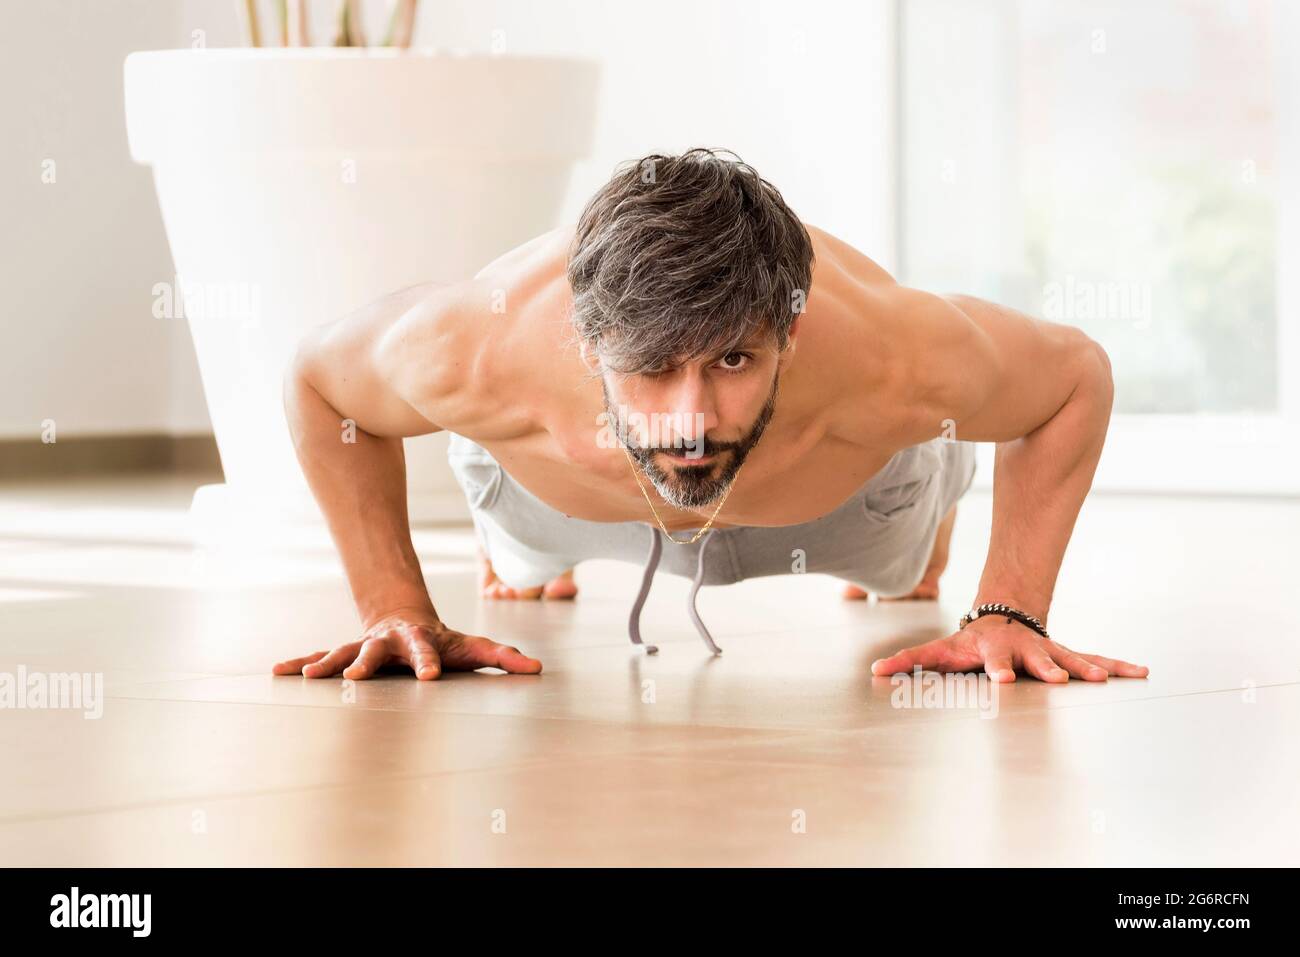 Determined athletic man exercising a plank variation or a push-up exercise during indoors fitness routine for muscular strength and body control at ho Stock Photo